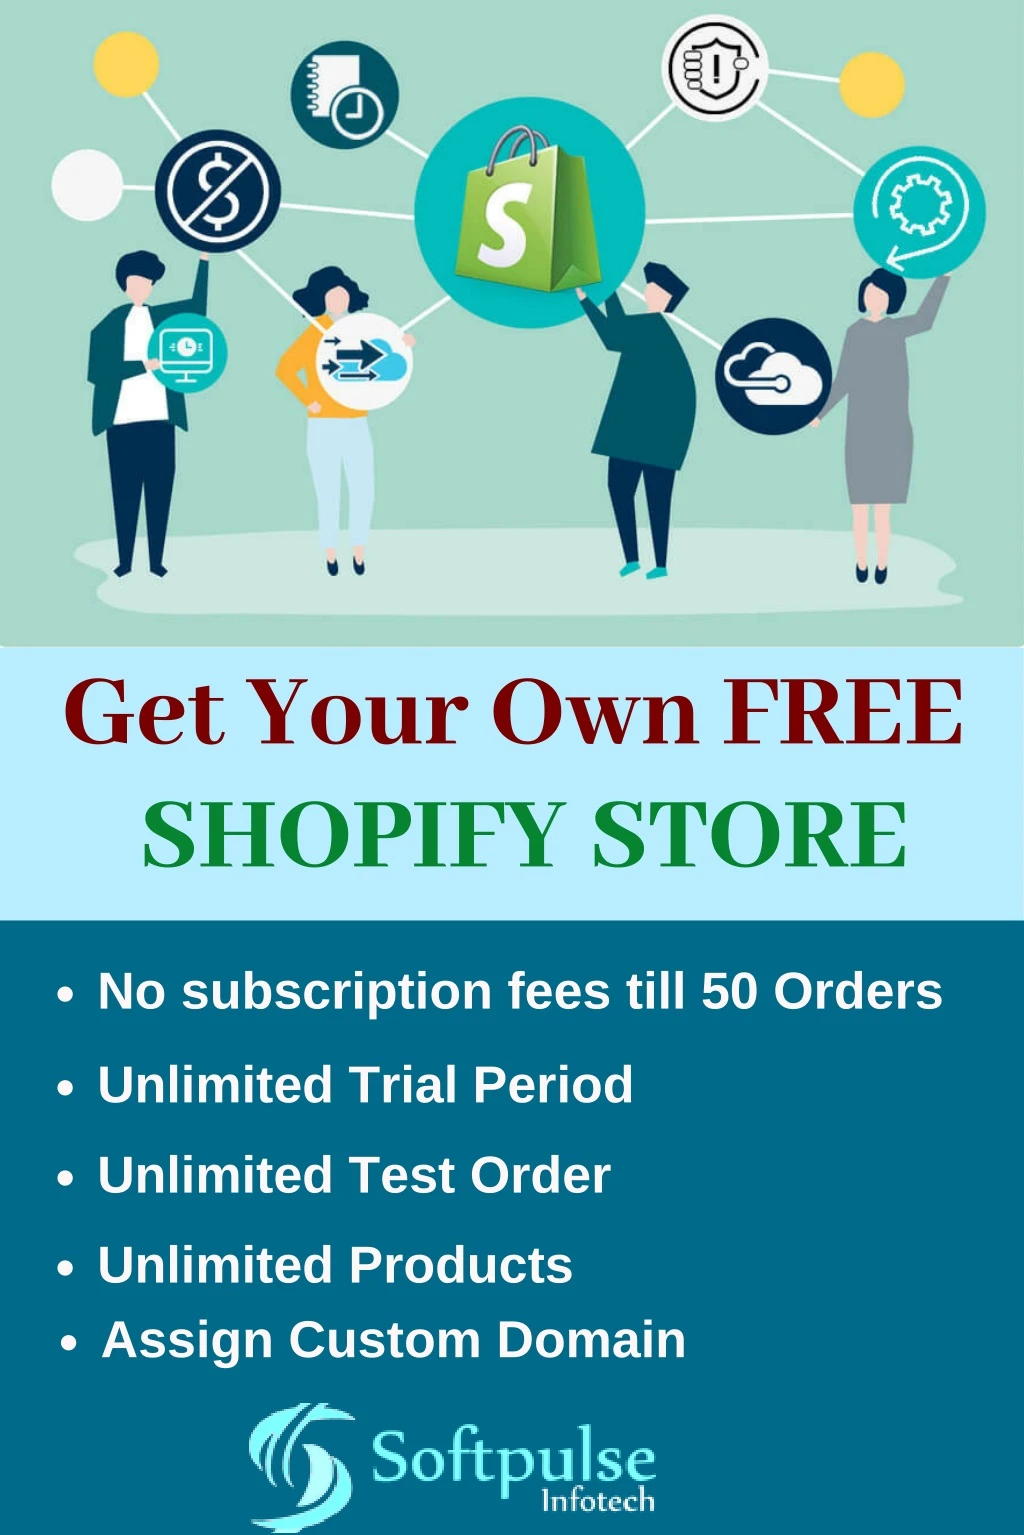 get your own free shopify store